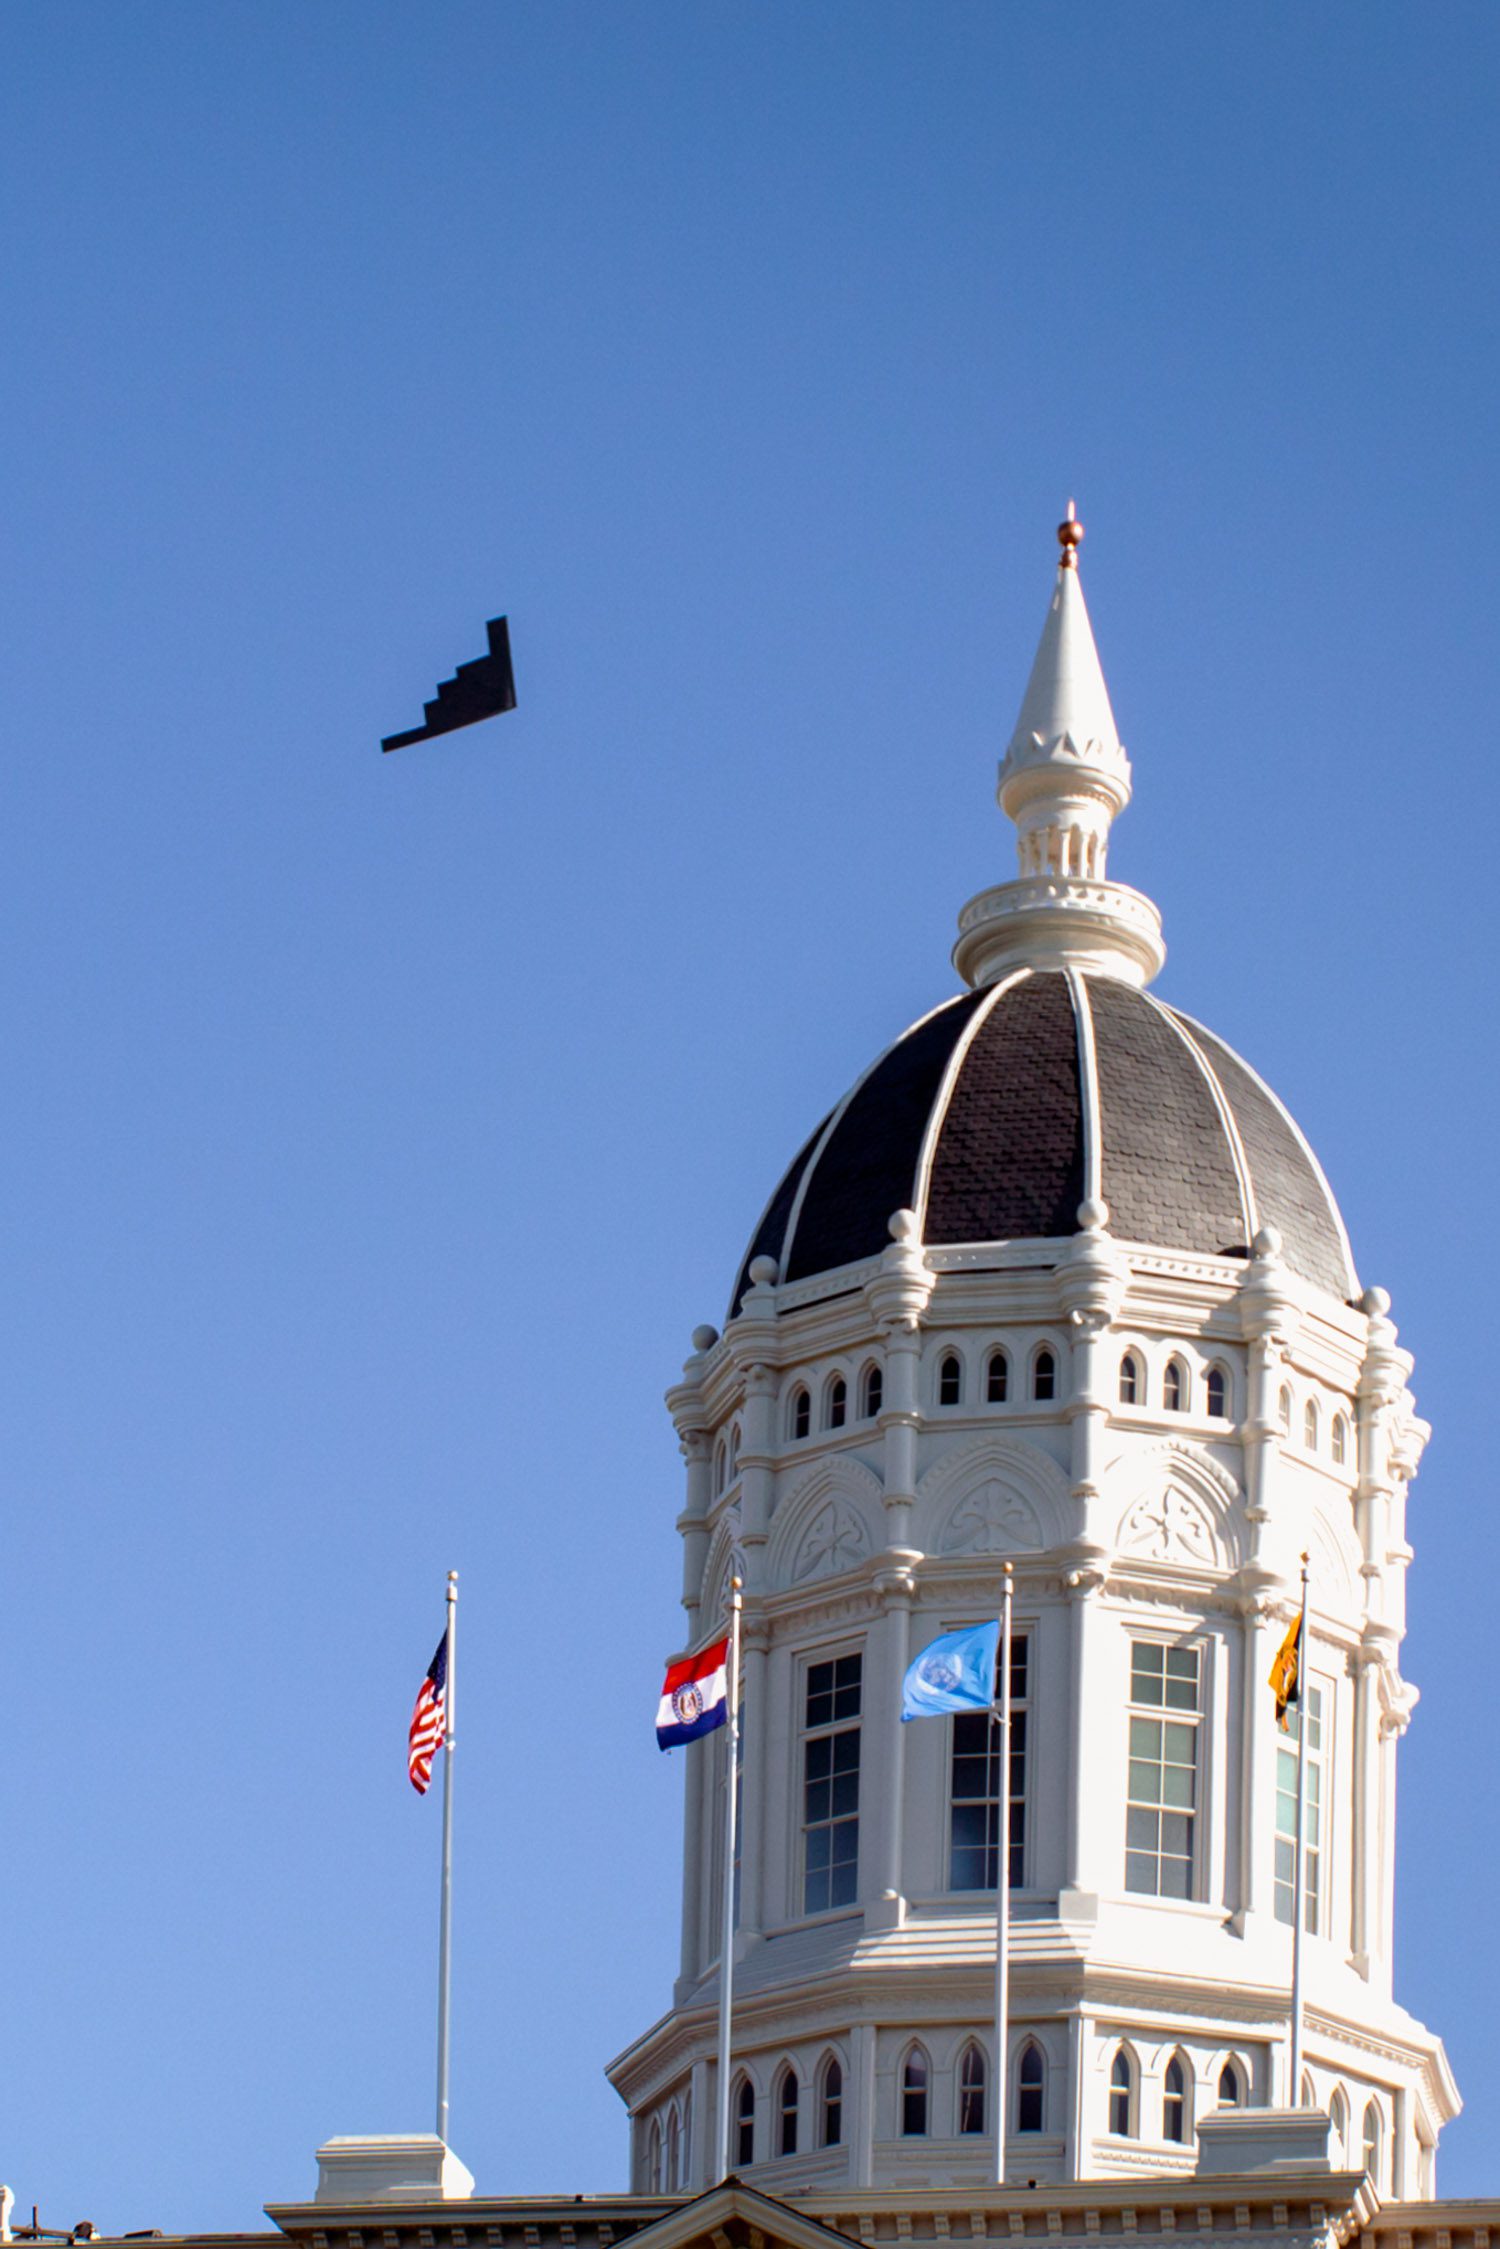 A B2 Stealth Bomber from Whiteman Air Force Base flys past the dome of Jesse Hall at Mizzou.